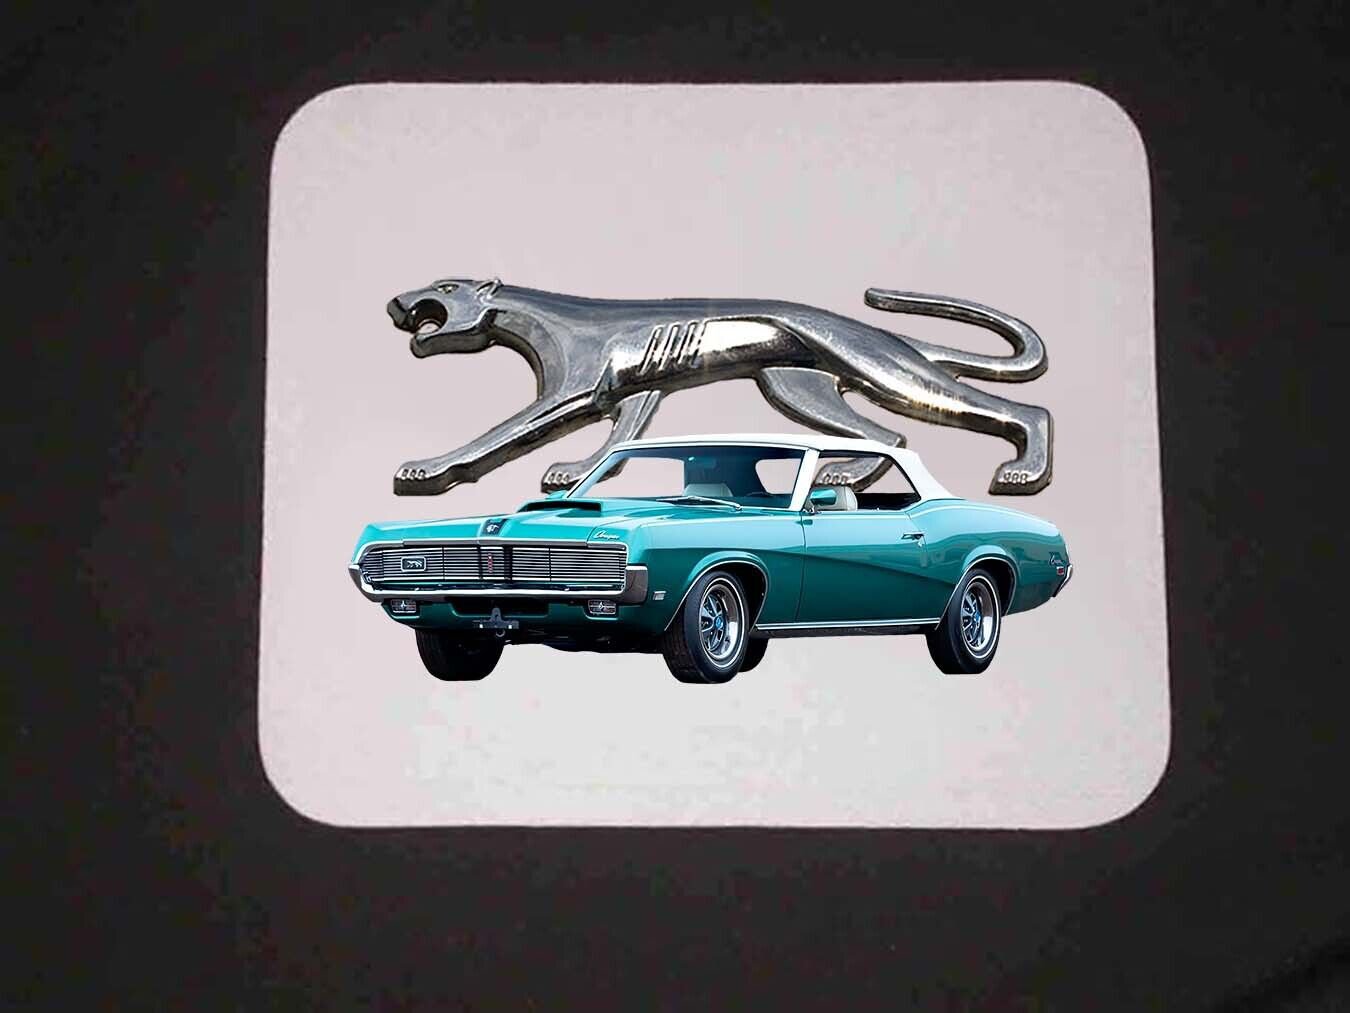 NEW 1969 Ford Mercury Cougar Mousepad FREE SHIPPING!!!